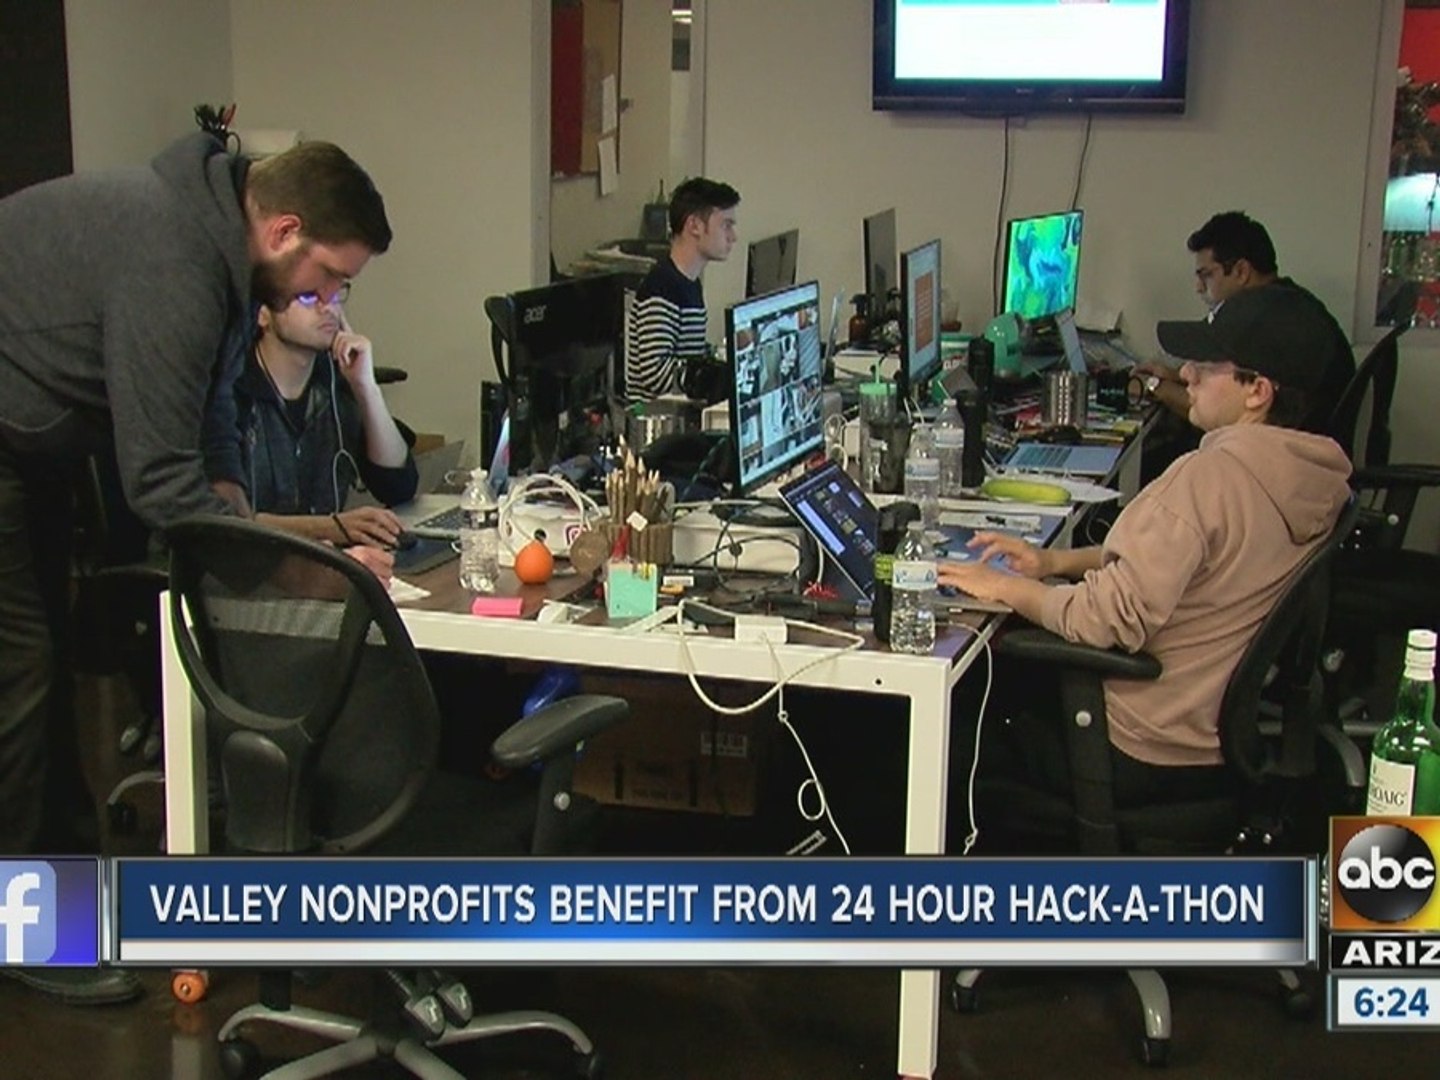 Valley non-profits benefit from 24-hour hack-a-thon in Phoenix